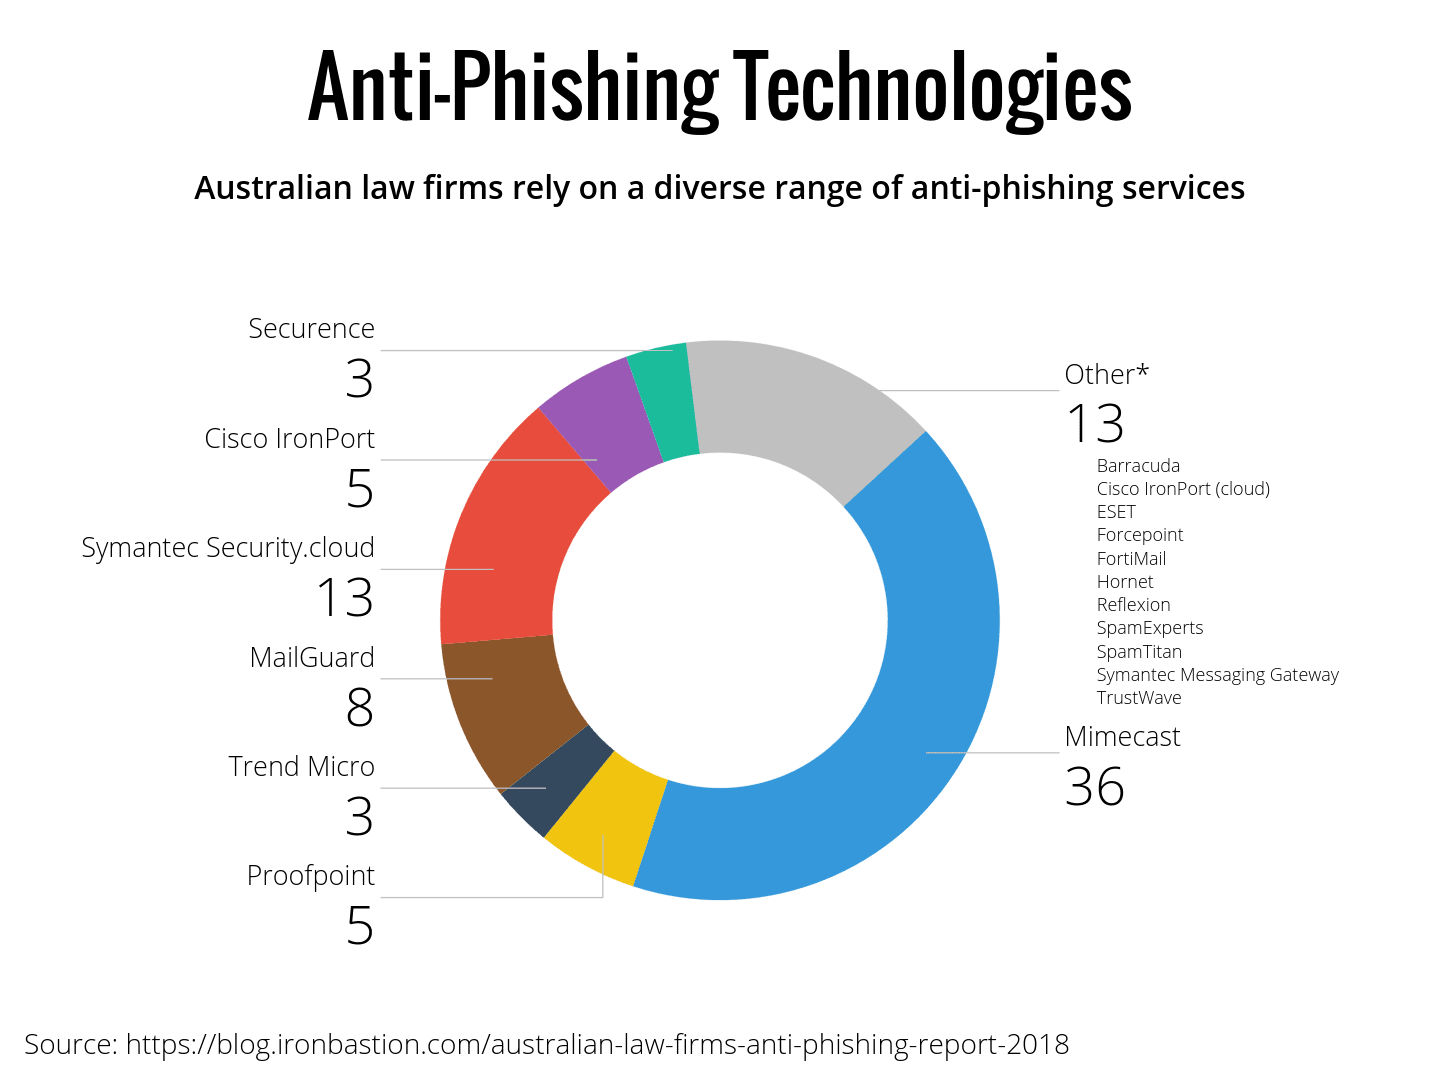 A wide variety of anti-phishing technologies are in use